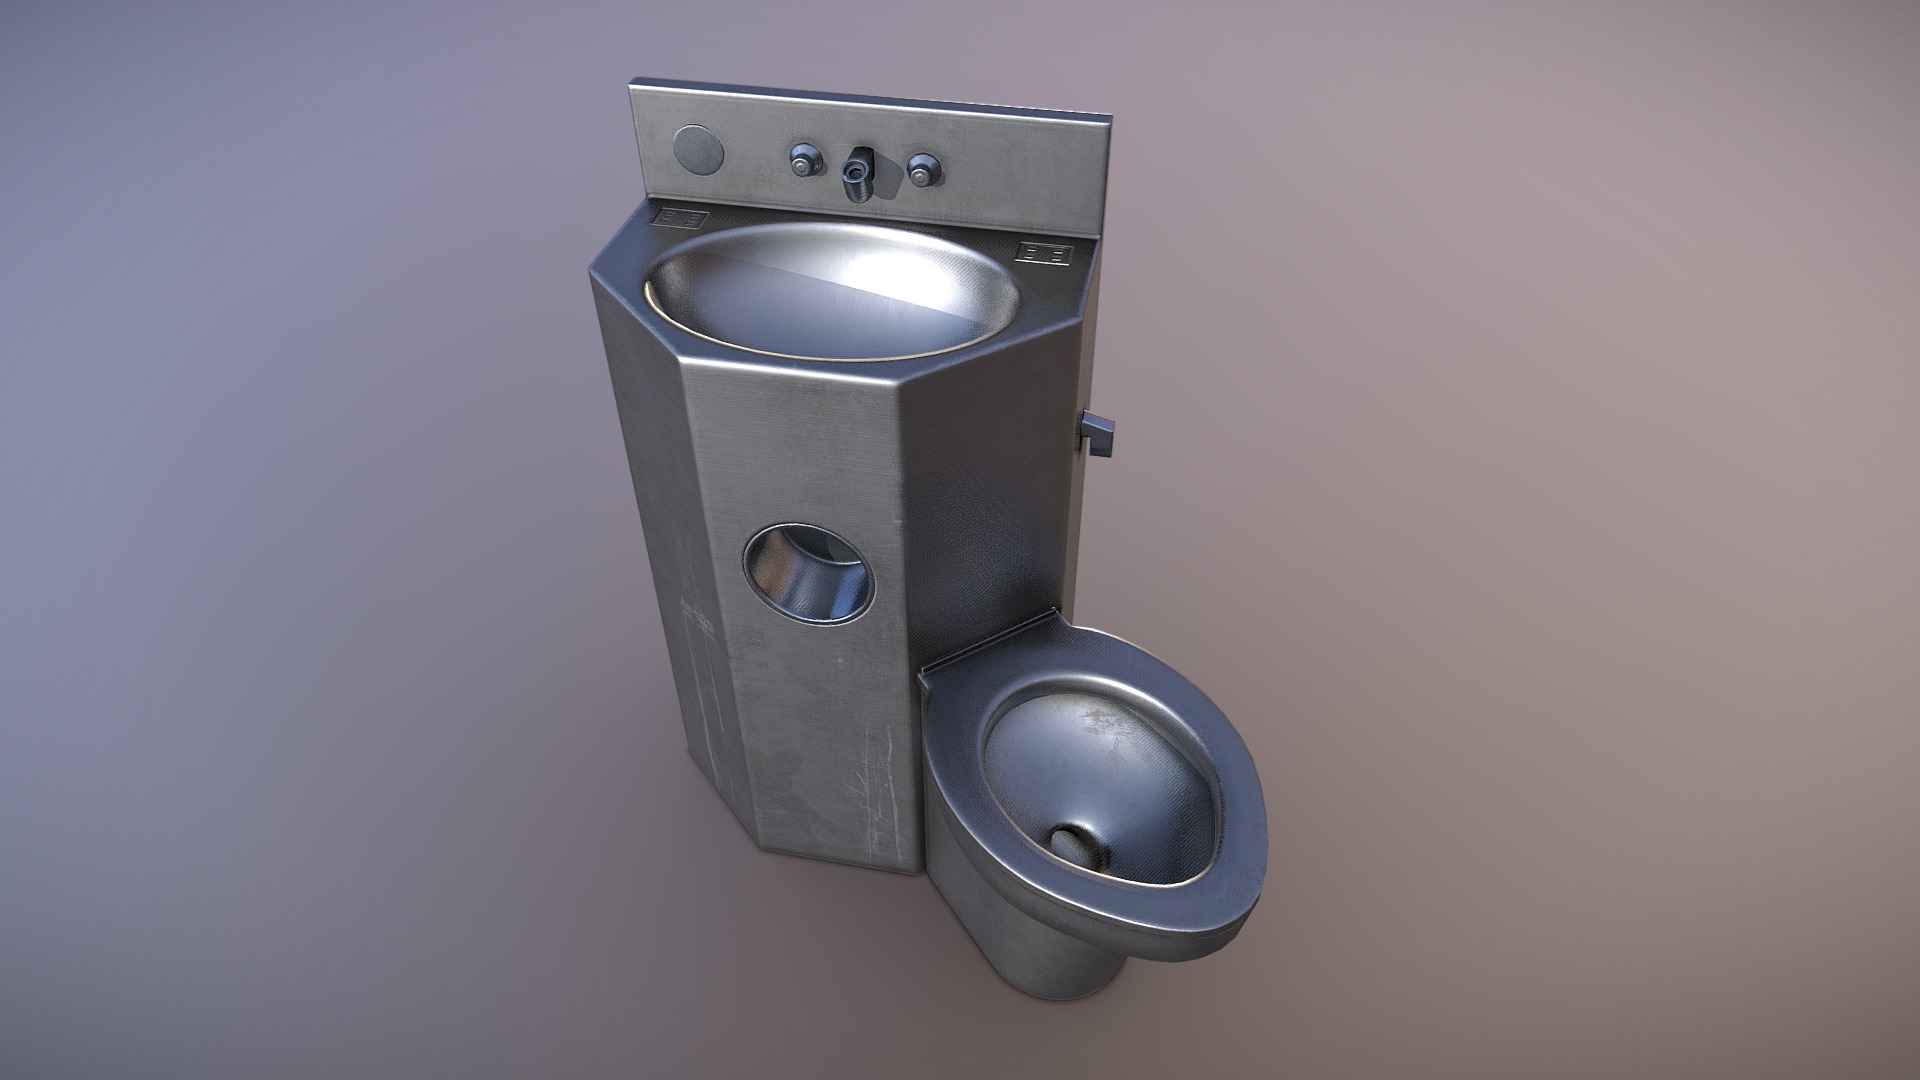 Toilet designed for PBR engines.

Originally modeled in 3ds Max 2019. Download includes .max, .fbx, .obj, metal/roughness PBR textures, textures for Unity and Unreal Engines, and additional texture maps such as curvature, AO, and color ID.

Specs




Scaled to approximate real world size (centimeters)

Mesh is in tris and quads, no n-gons.

Textures

1 Material: 
2048x2048 Base Color, Roughness, Metallic, Normal, AO

Unity Engine 5 Textures: AlbedoTransparency, MetallicSmoothness, Normal, Occlusion

Unreal Engine 4 Textures: BaseColor, Normal, RoughnessMetallicAO - Prison Toilet - Buy Royalty Free 3D model by Luchador (@Luchador90) 3d model